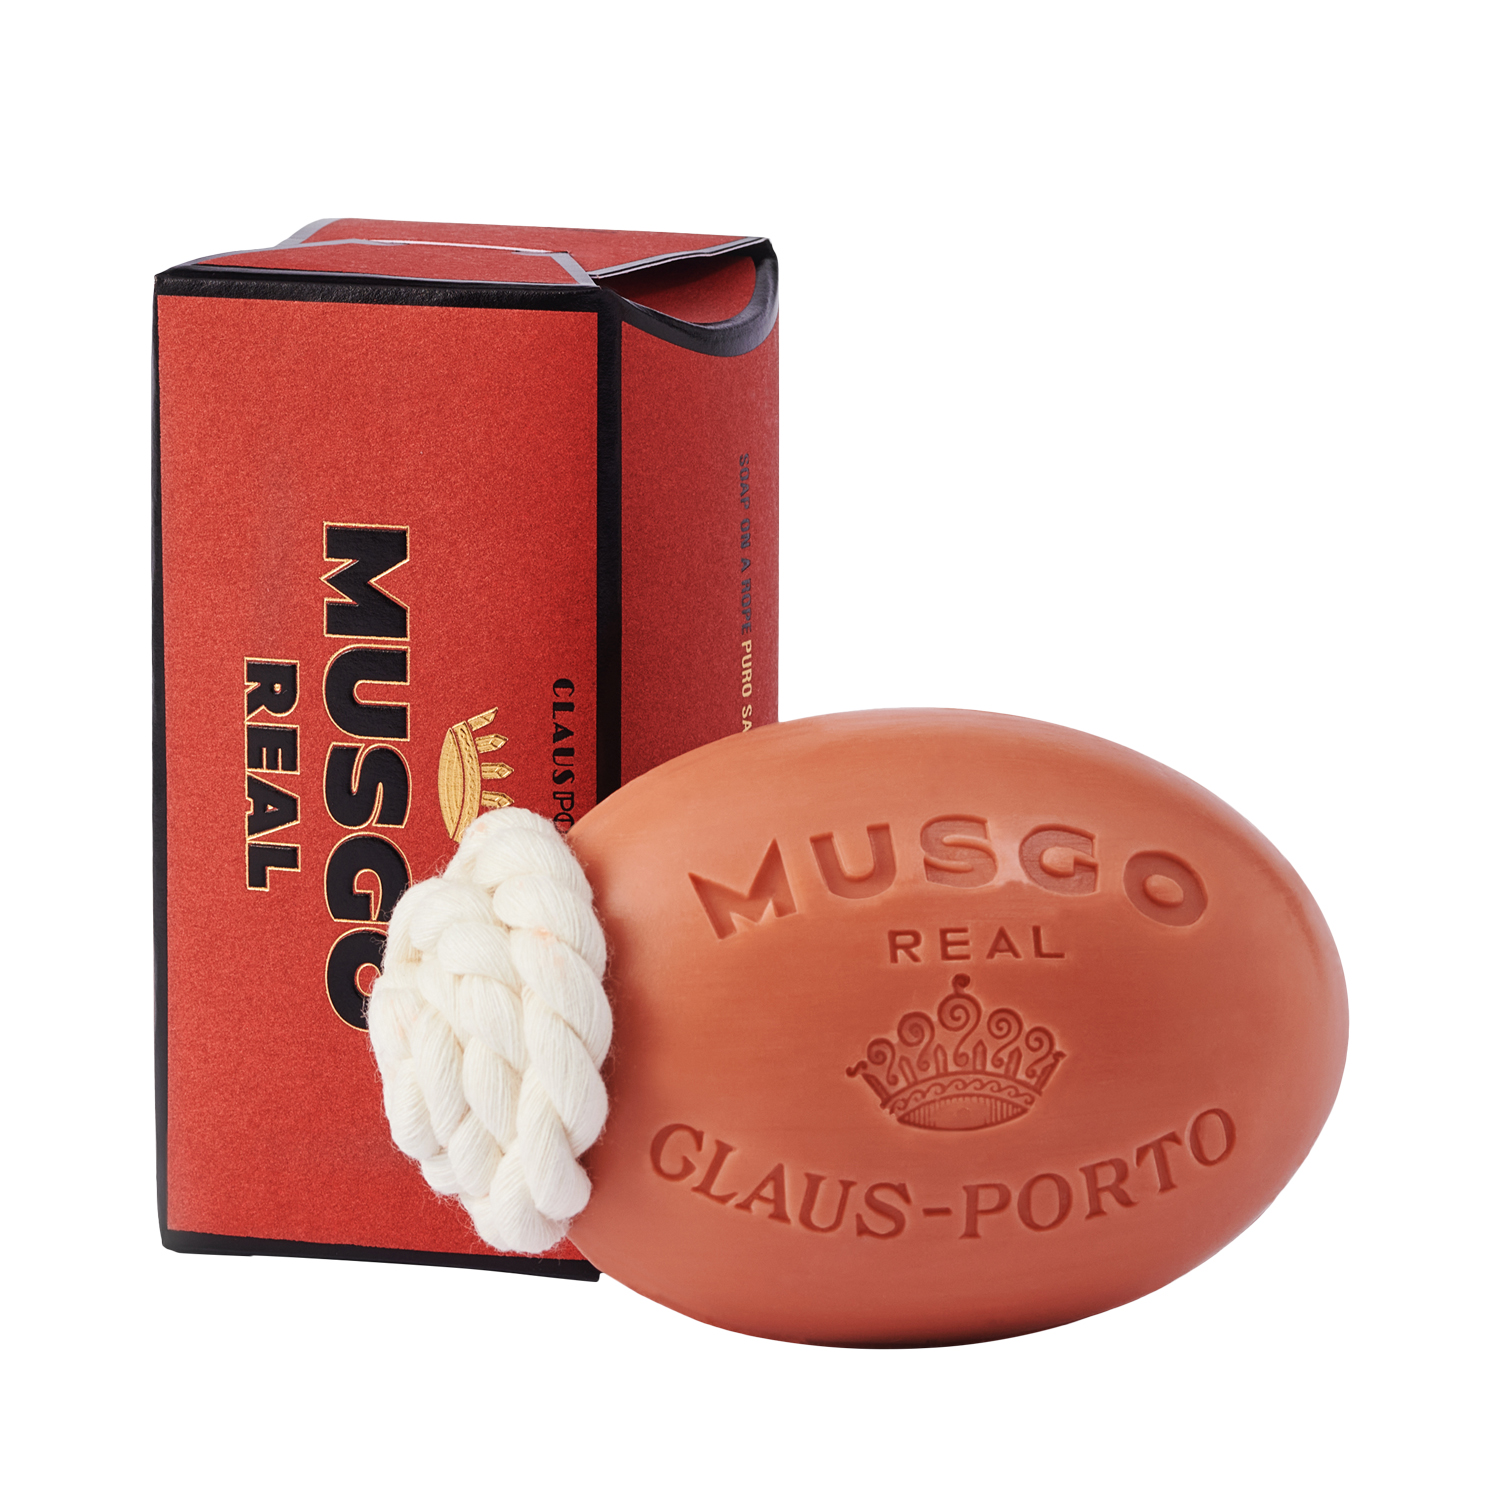 Musgo Real - Soap on a Rope - Puro Sangue - Körperseife